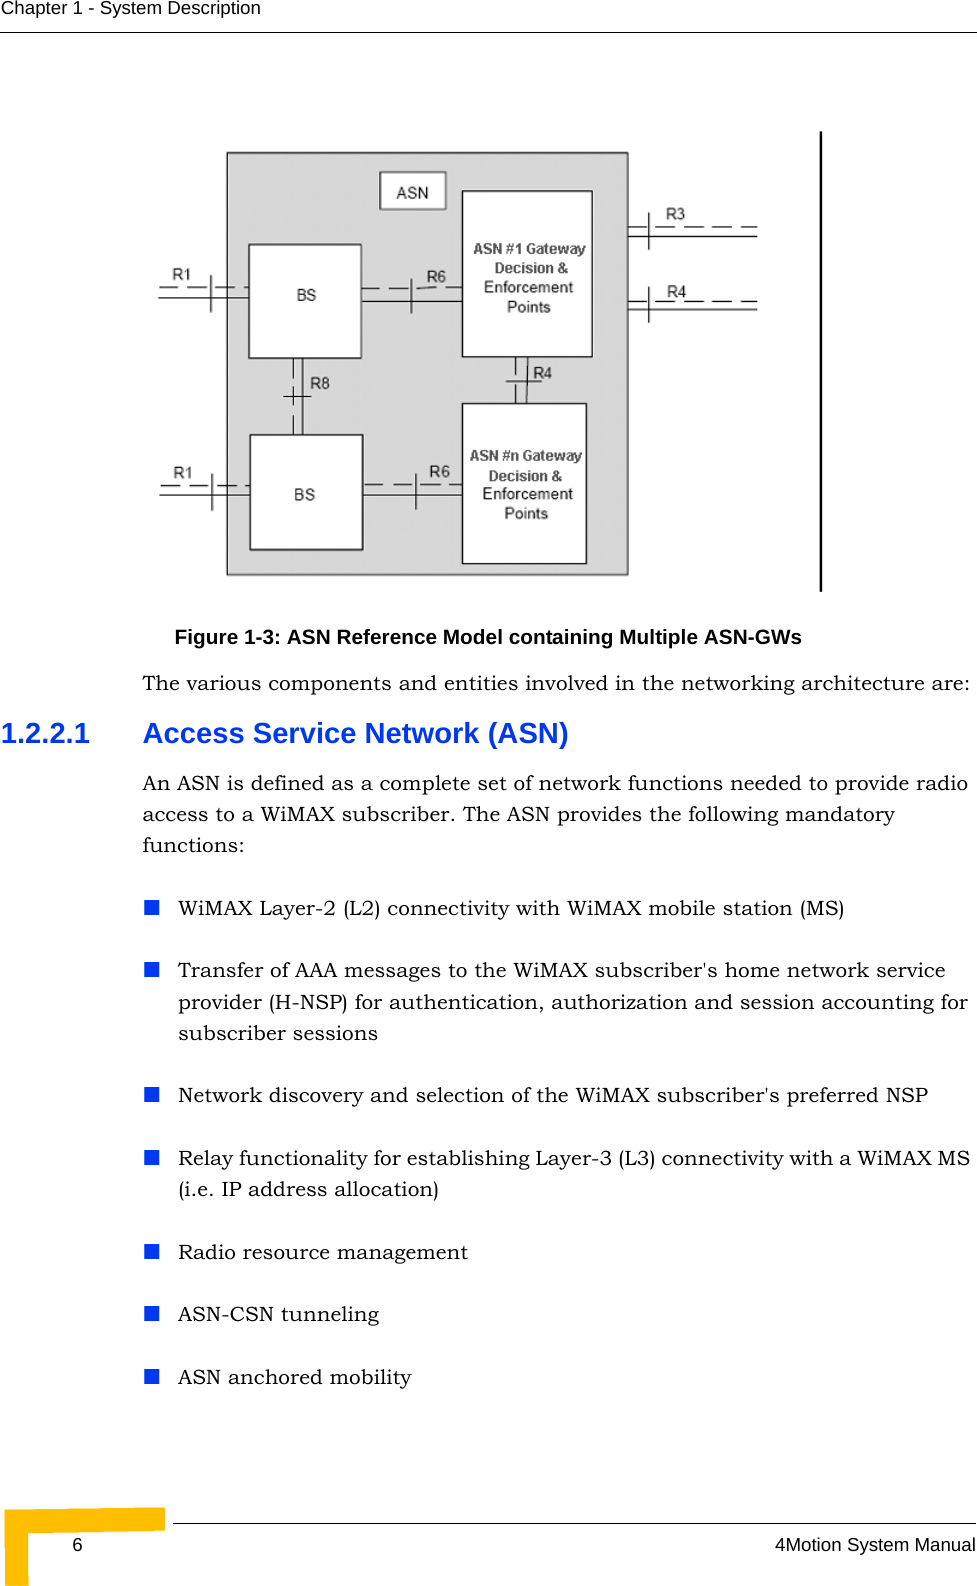 64Motion System ManualChapter 1 - System Description The various components and entities involved in the networking architecture are:1.2.2.1 Access Service Network (ASN)An ASN is defined as a complete set of network functions needed to provide radio access to a WiMAX subscriber. The ASN provides the following mandatory functions:WiMAX Layer-2 (L2) connectivity with WiMAX mobile station (MS) Transfer of AAA messages to the WiMAX subscriber&apos;s home network service provider (H-NSP) for authentication, authorization and session accounting for subscriber sessionsNetwork discovery and selection of the WiMAX subscriber&apos;s preferred NSPRelay functionality for establishing Layer-3 (L3) connectivity with a WiMAX MS (i.e. IP address allocation)Radio resource managementASN-CSN tunnelingASN anchored mobilityFigure 1-3: ASN Reference Model containing Multiple ASN-GWs